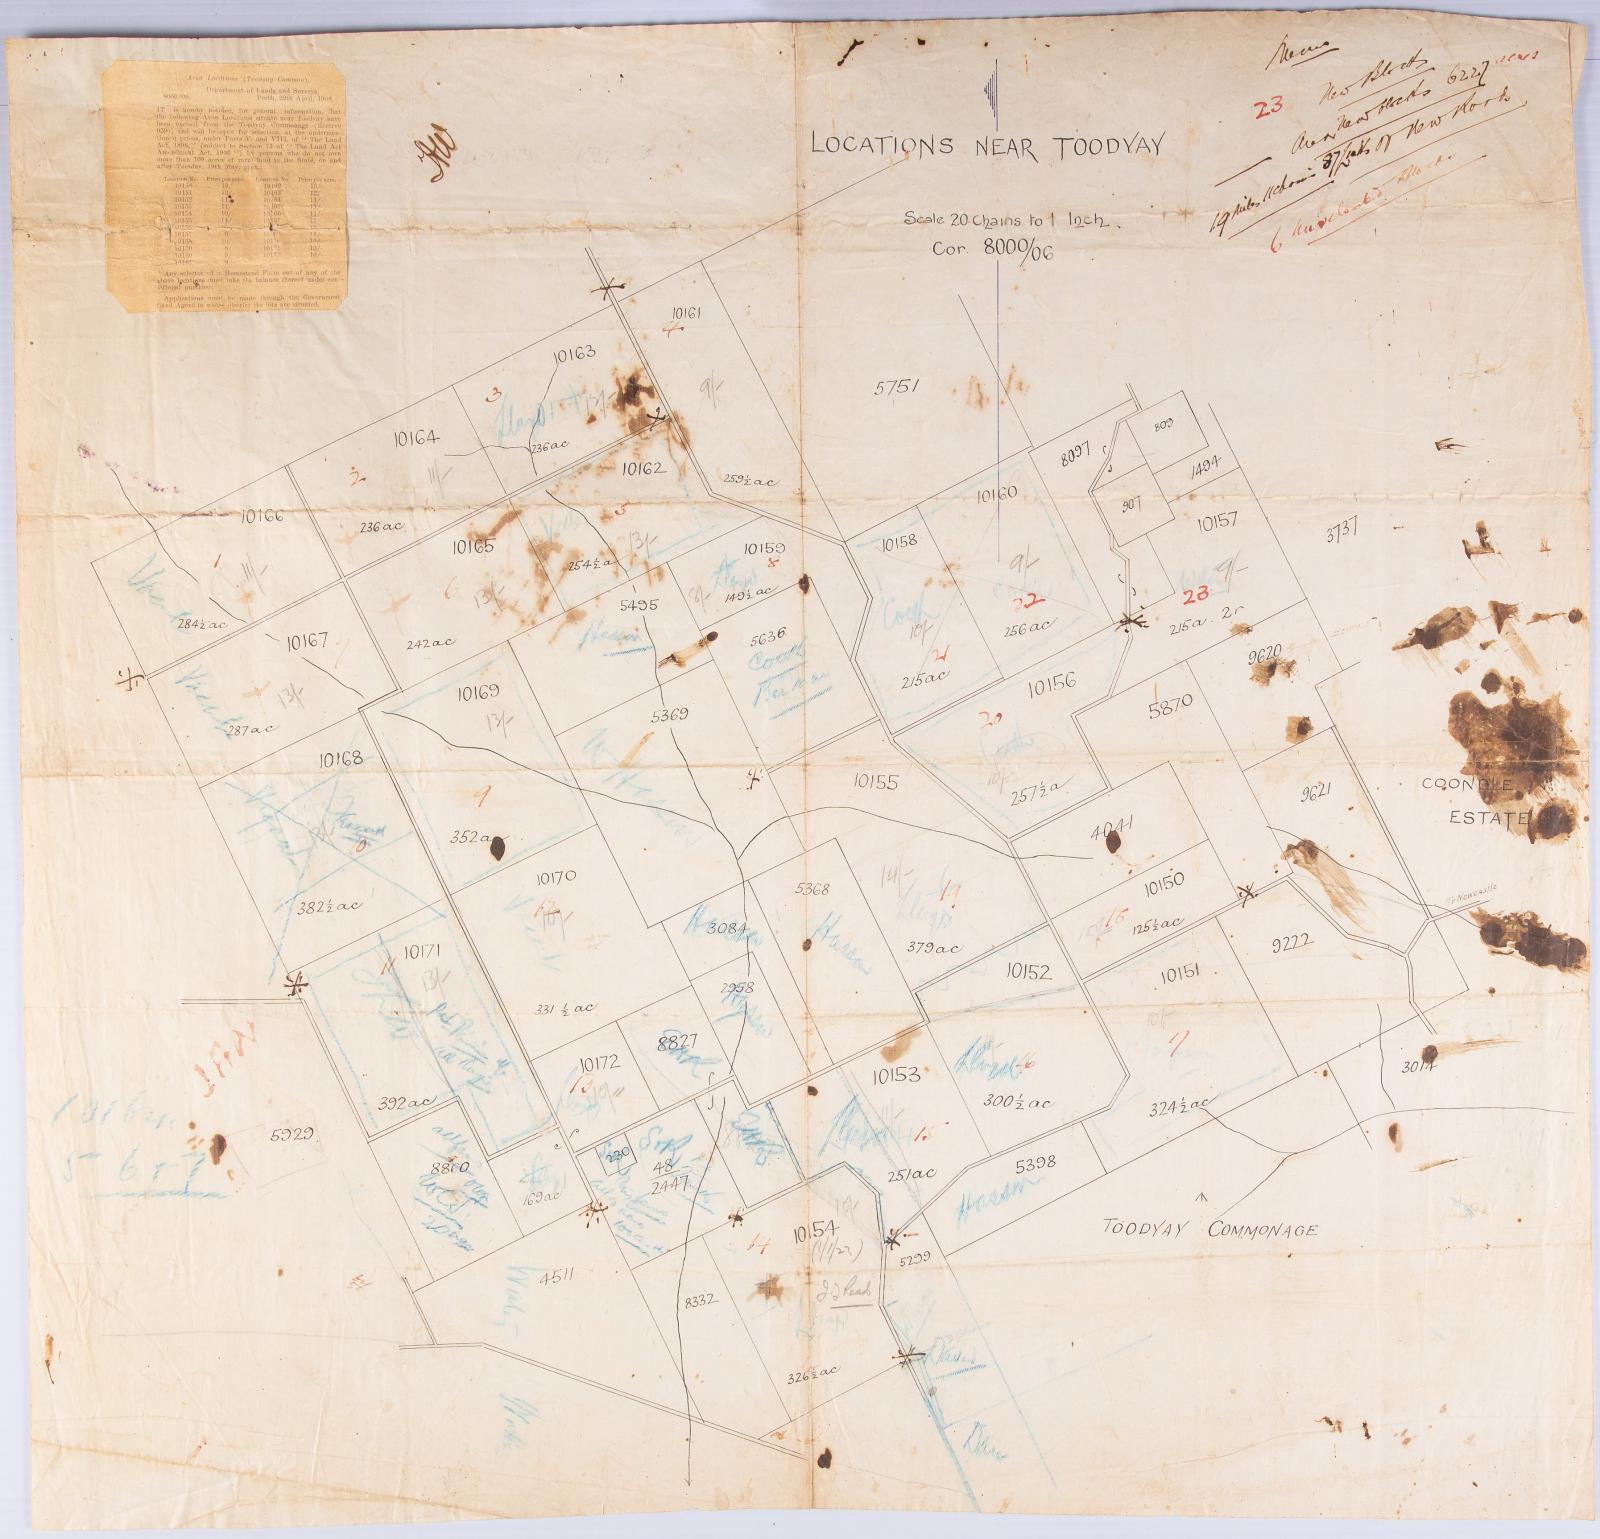 Plan, division of Toodyay Commonage 1908